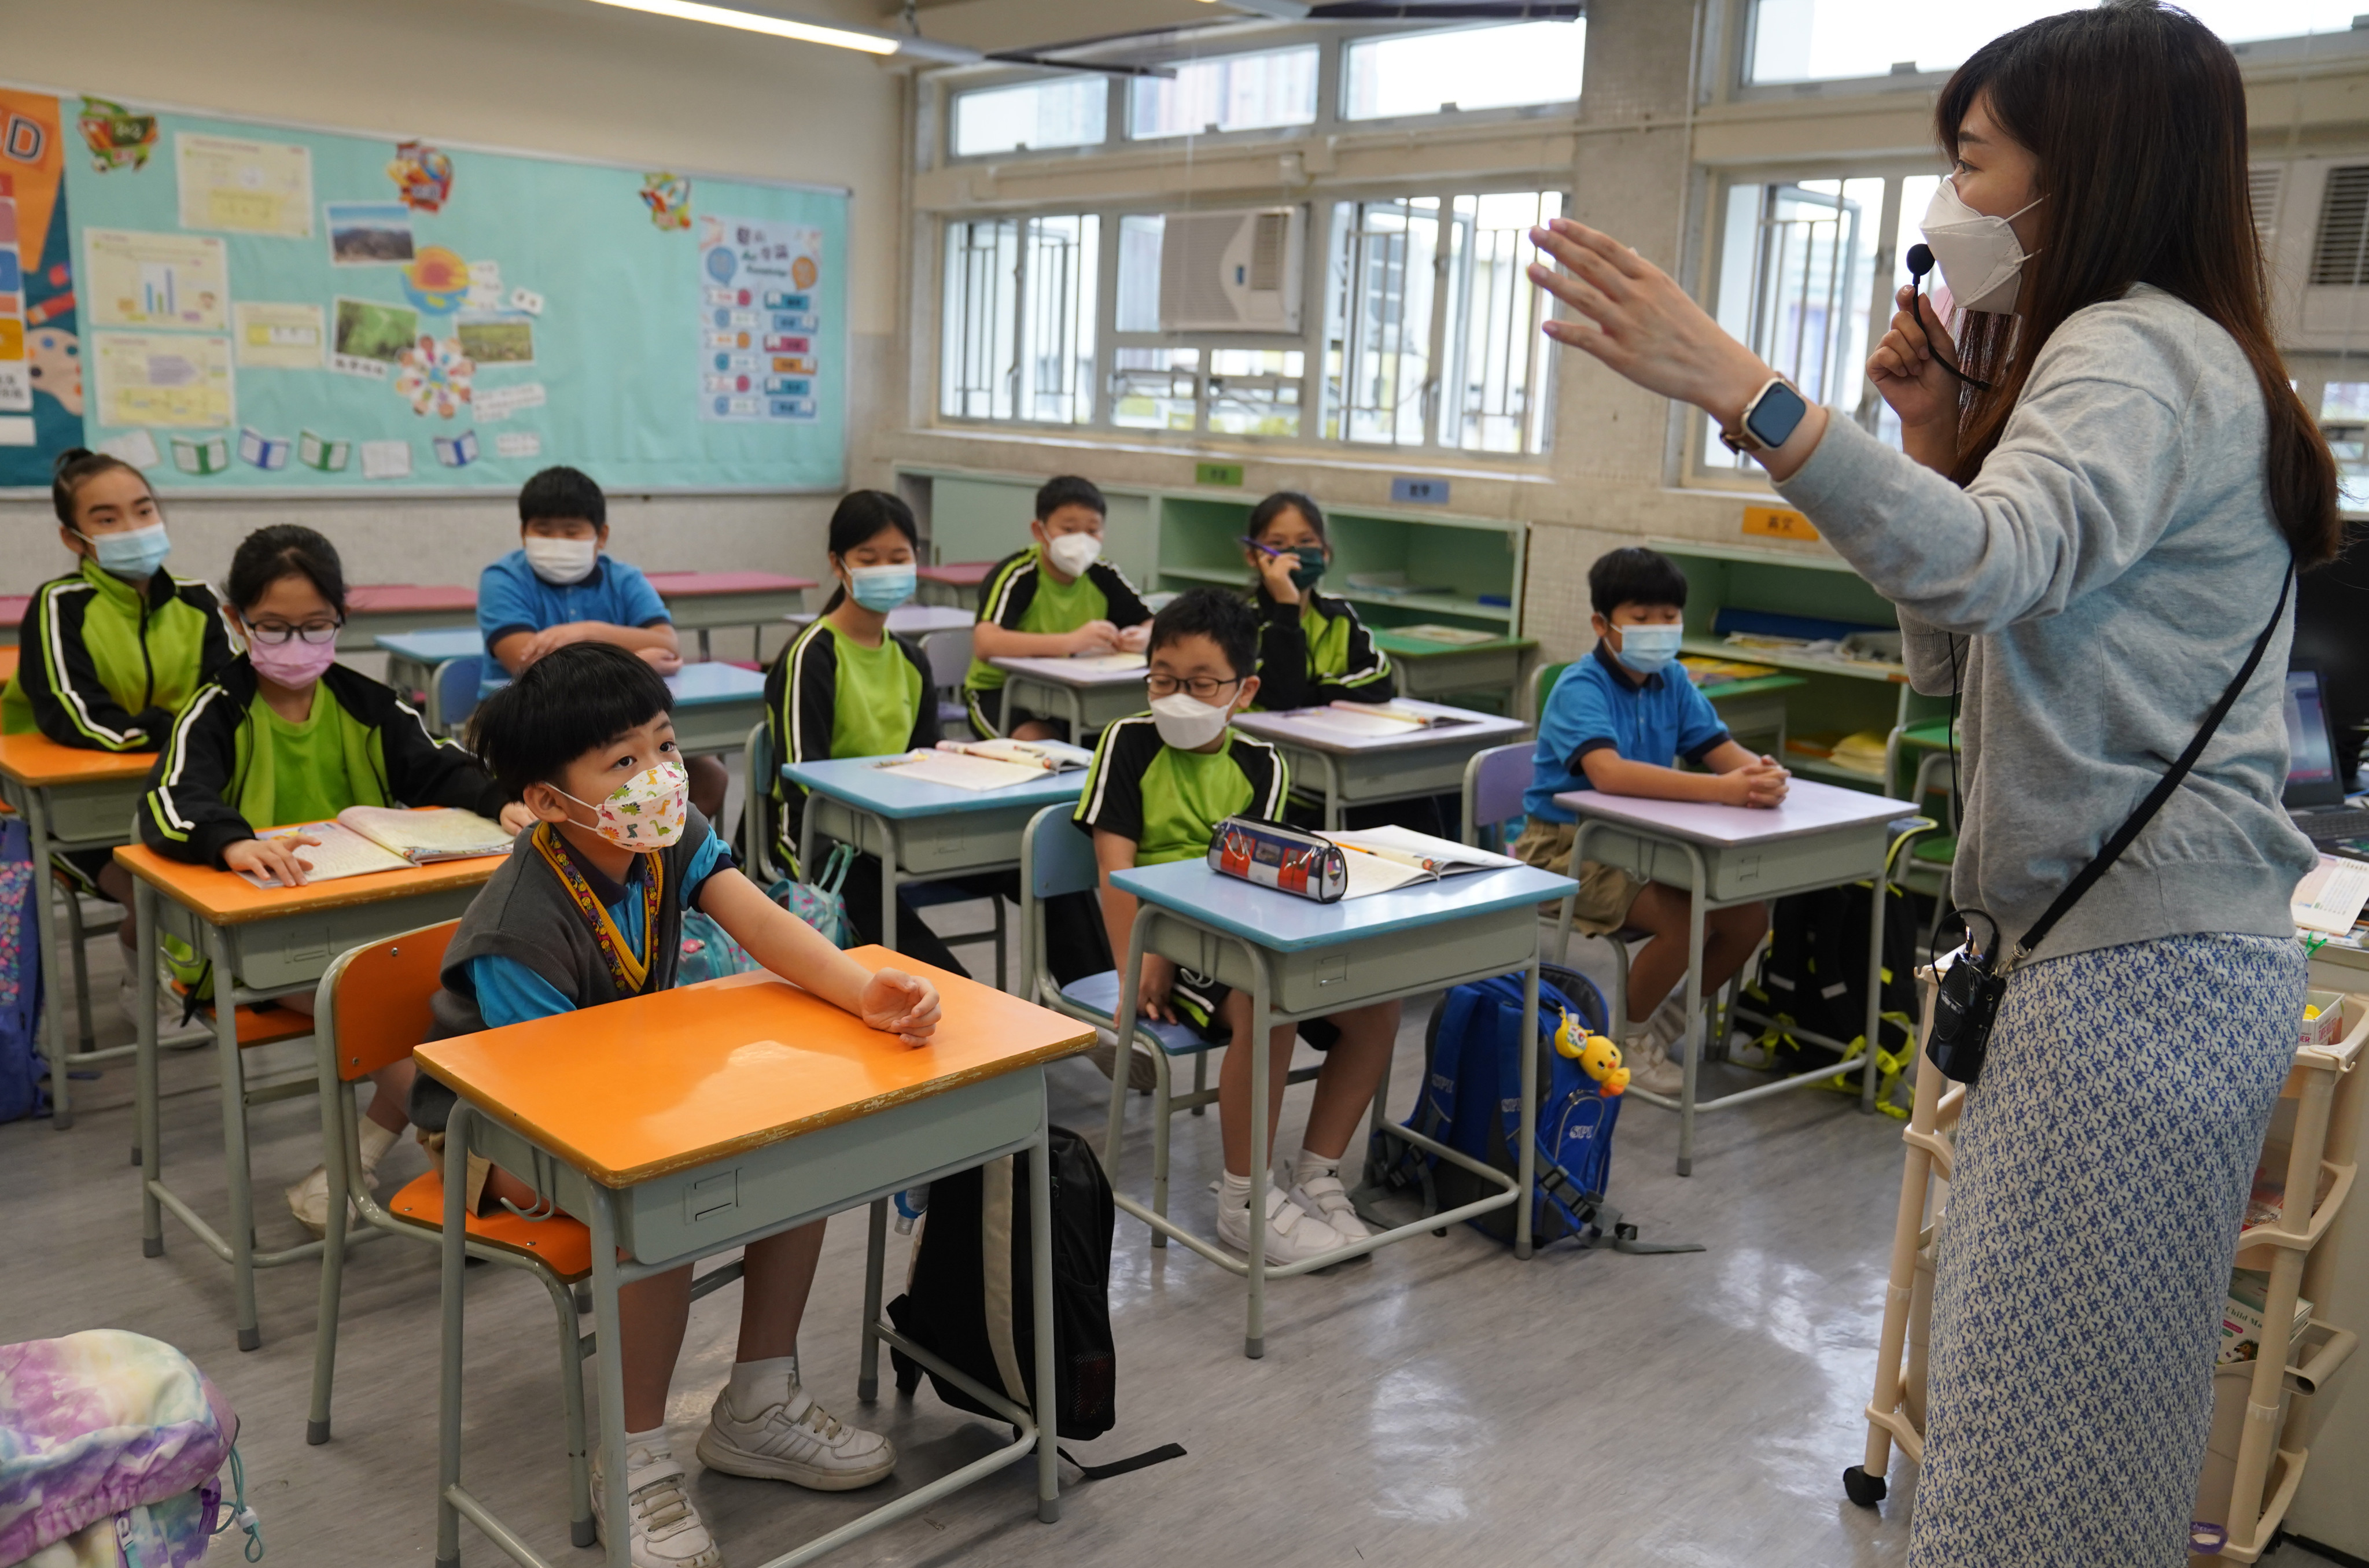 A teacher speaks to students during class at a primary school in Tsing Yi on April 22. The high rate of turnover among native English teachers in Hong Kong could be exacerbated by their facing a lower retirement age than their local counterparts. Photo: Sam Tsang 